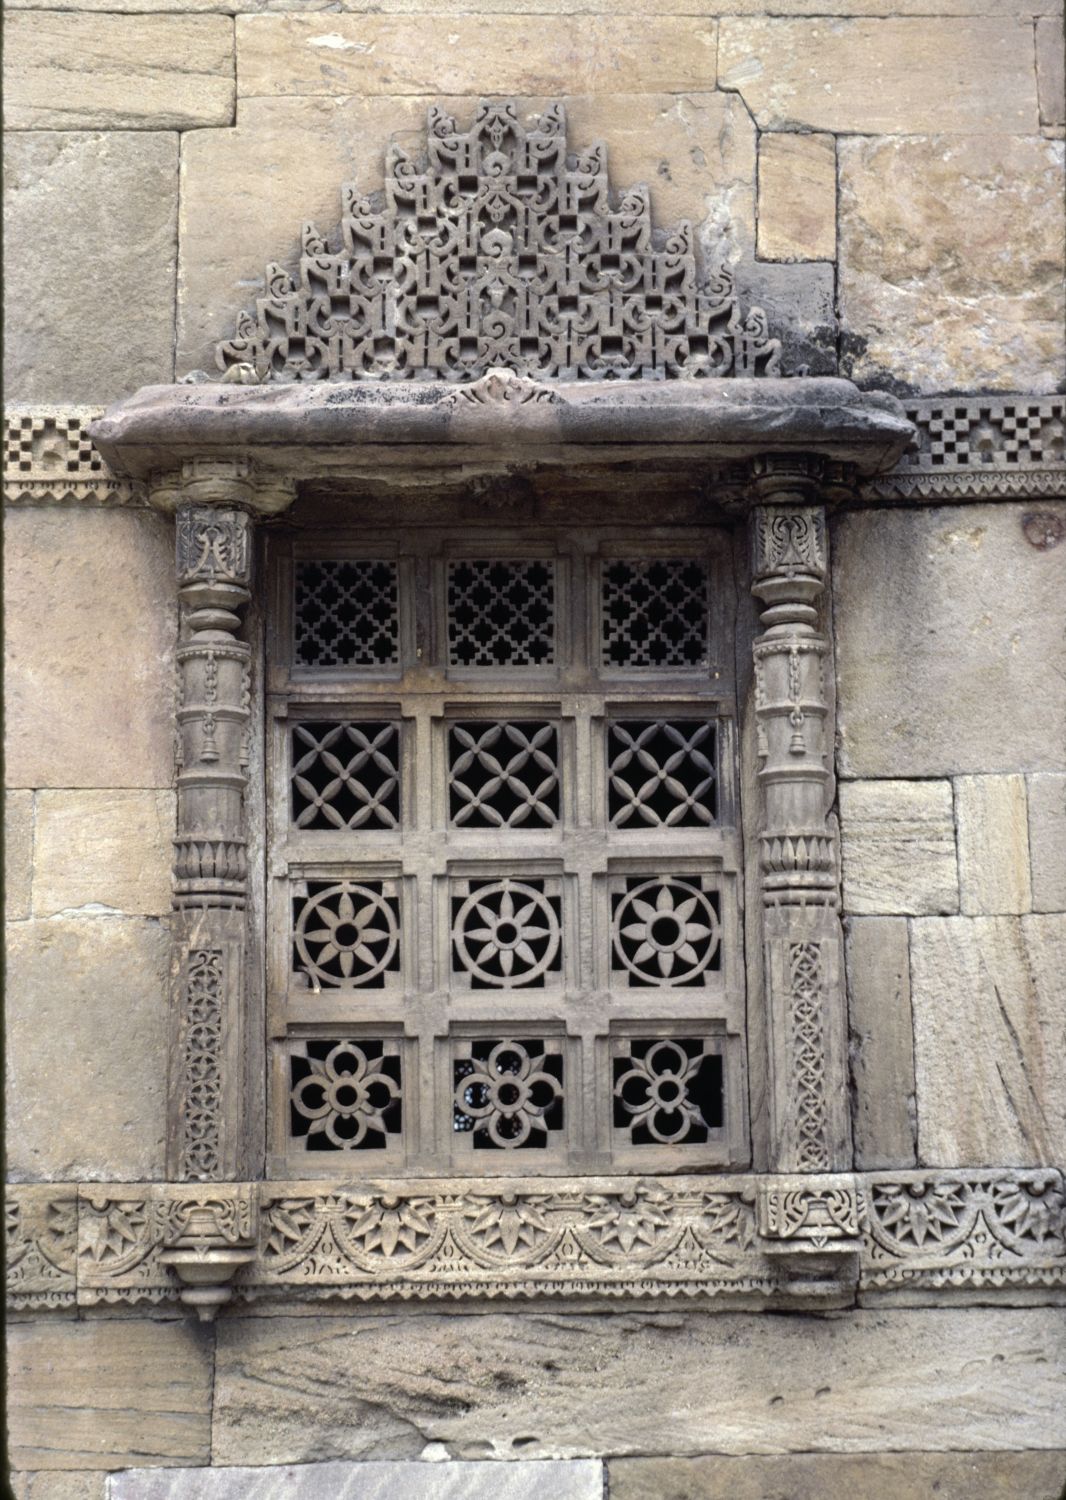 View of window on facade with decorative marble screen (jali).